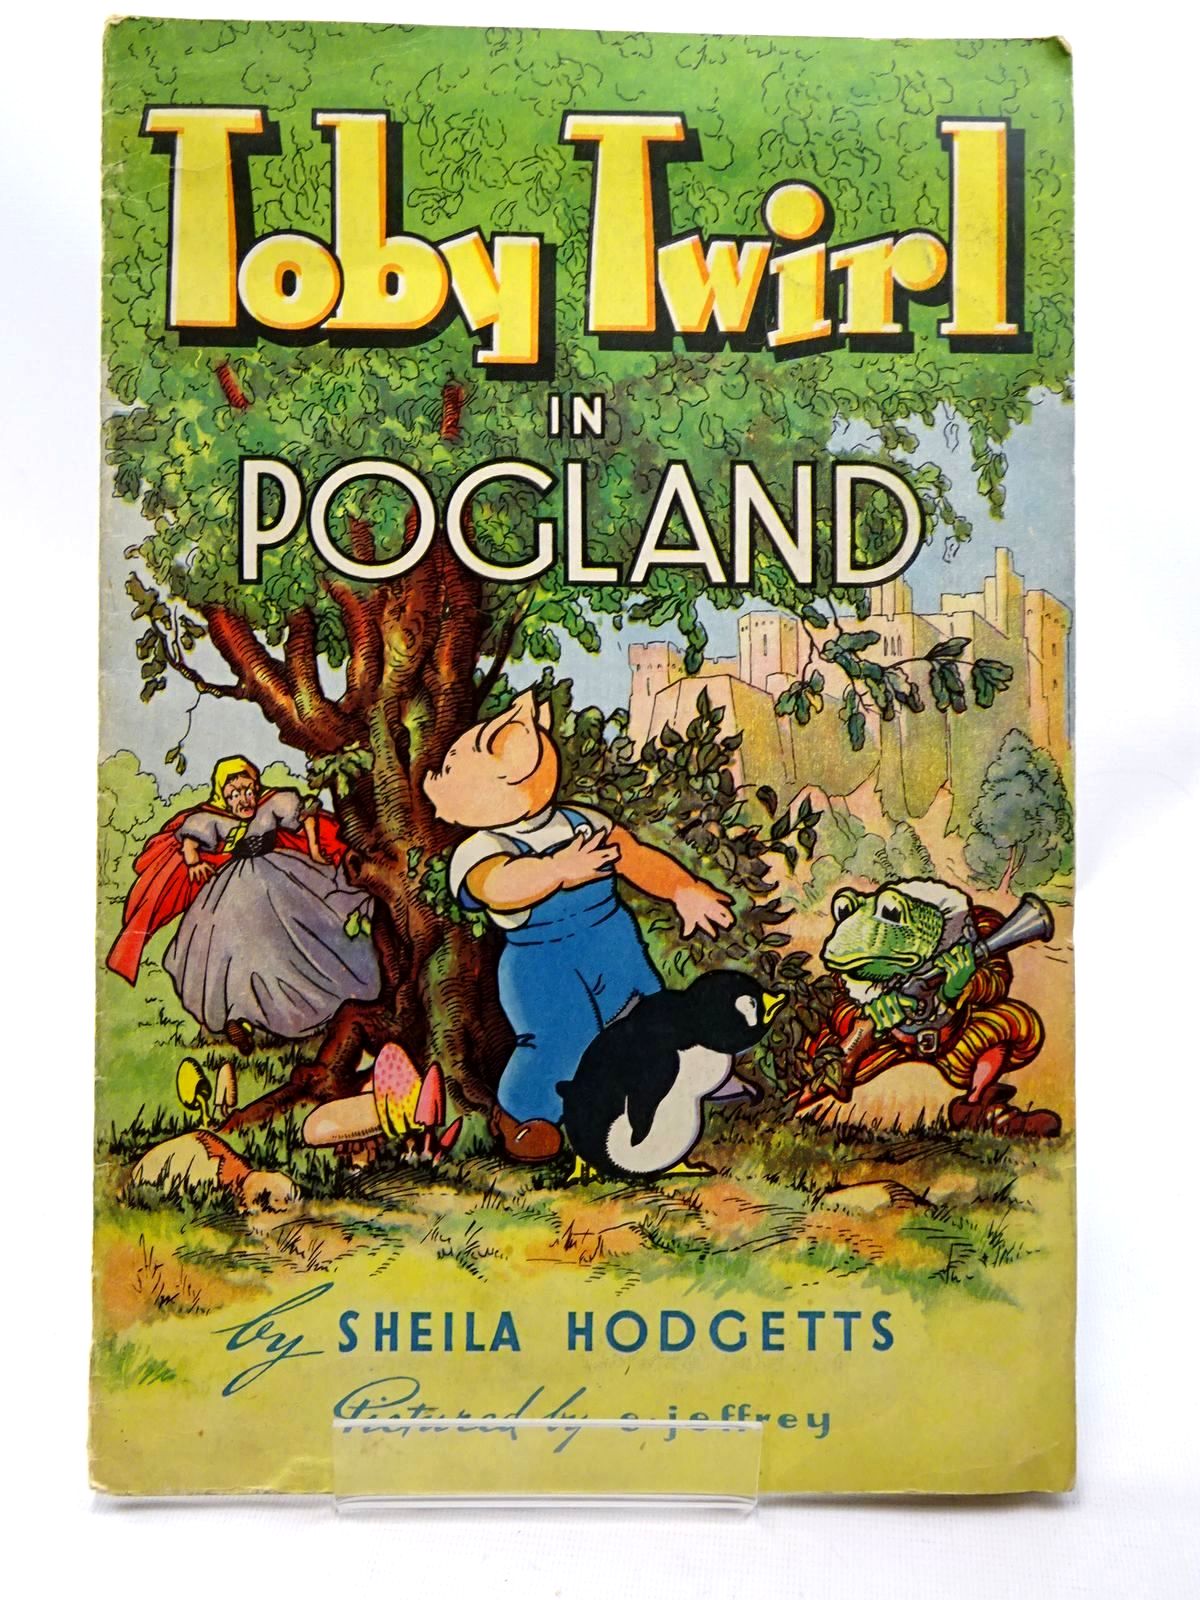 Photo of TOBY TWIRL IN POGLAND written by Hodgetts, Sheila illustrated by Jeffrey, E. published by Sampson Low, Marston & Co. Ltd. (STOCK CODE: 2124515)  for sale by Stella & Rose's Books